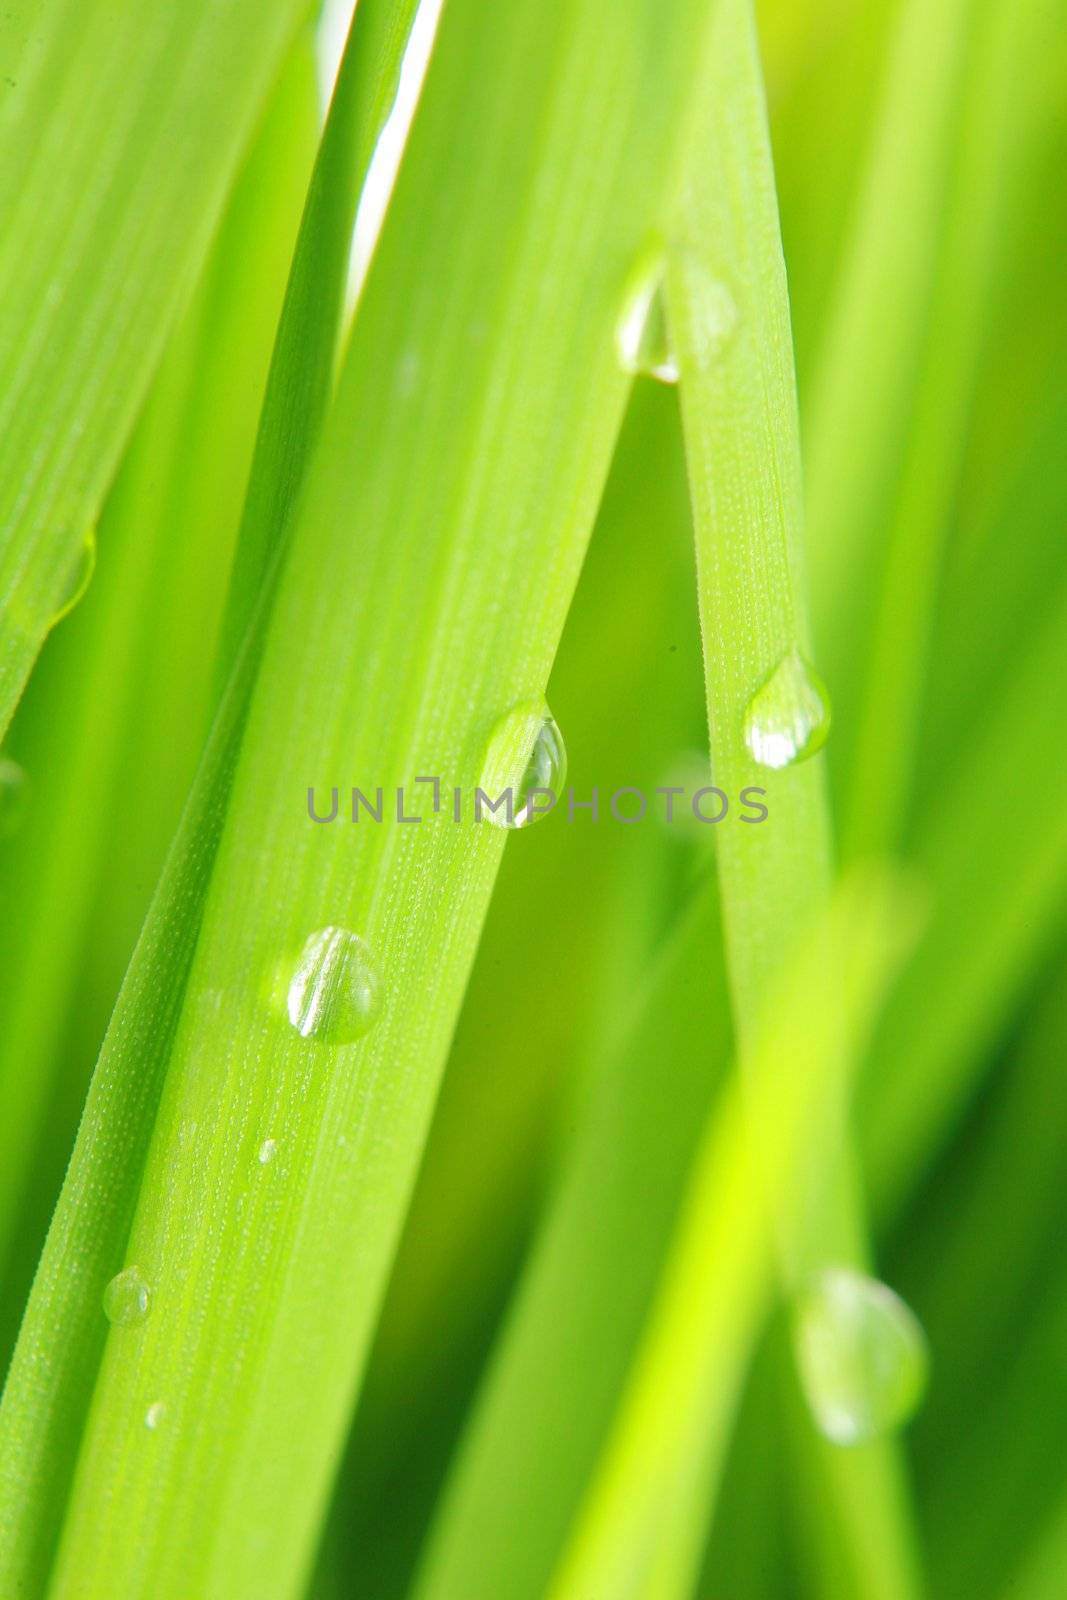 close-up of green grass, extreme shallow focus!...........